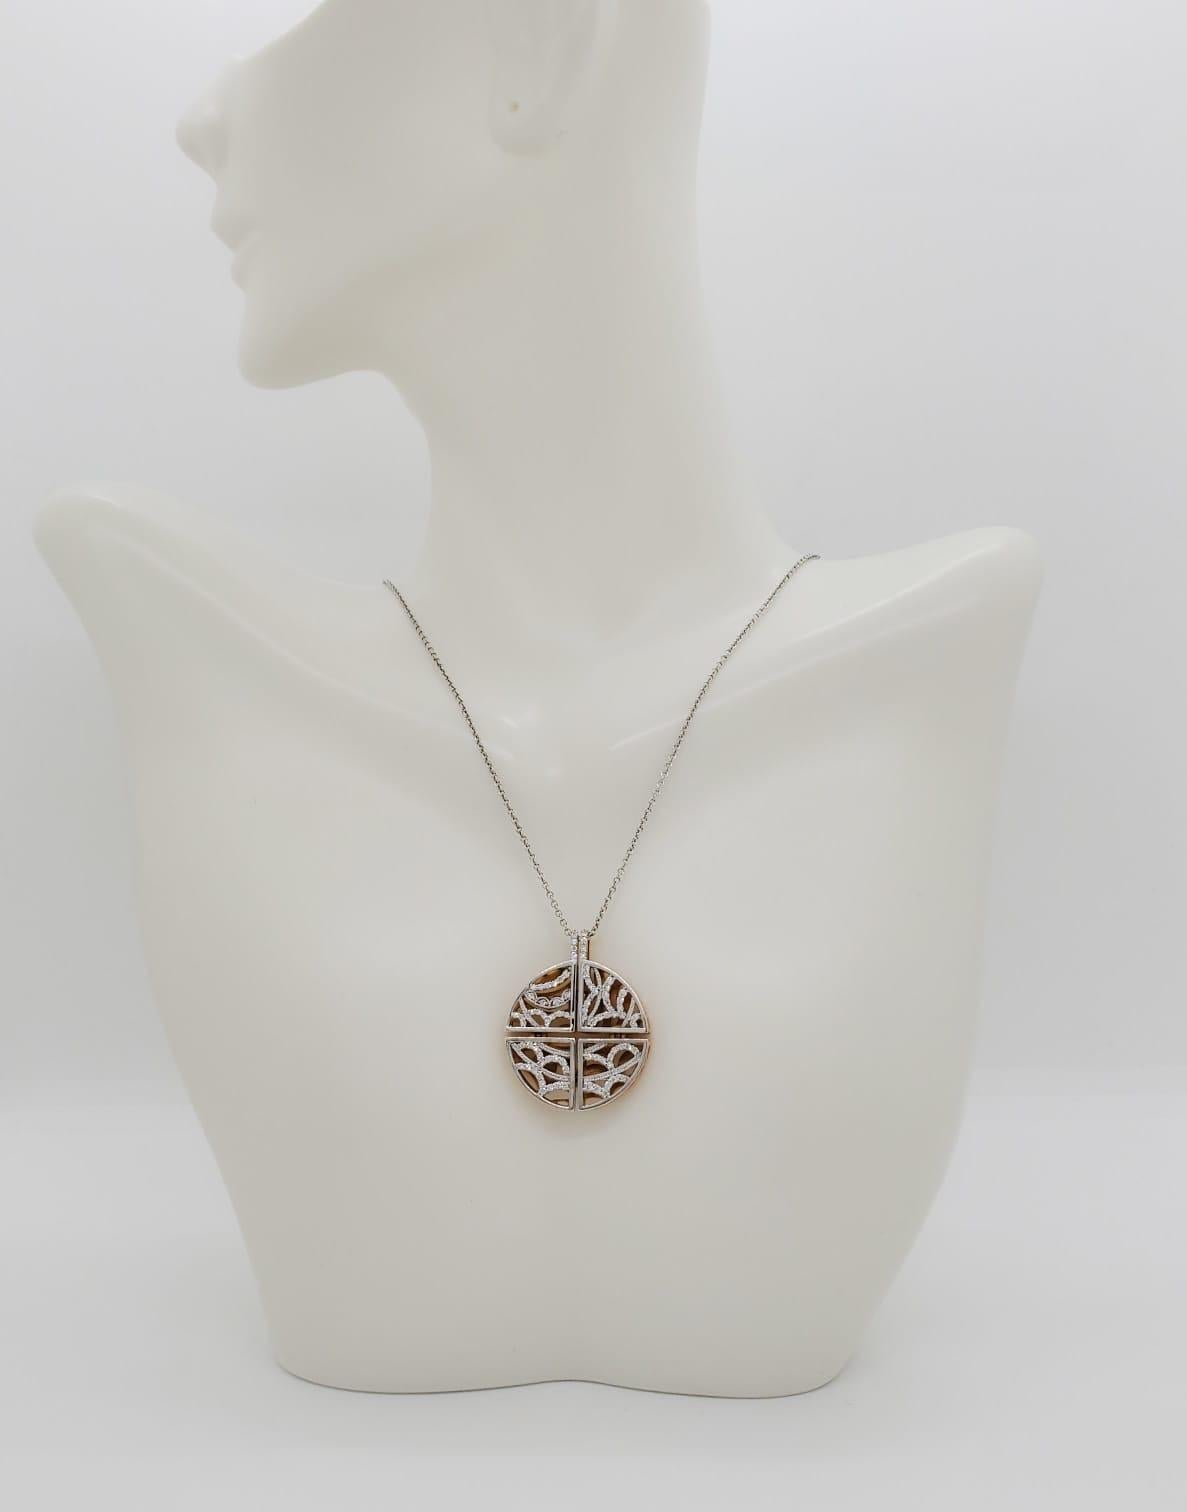 Beautiful Tacori pendant necklace with 0.38 ct. good quality diamonds handmade in 18k yellow and white gold.  Length is 18